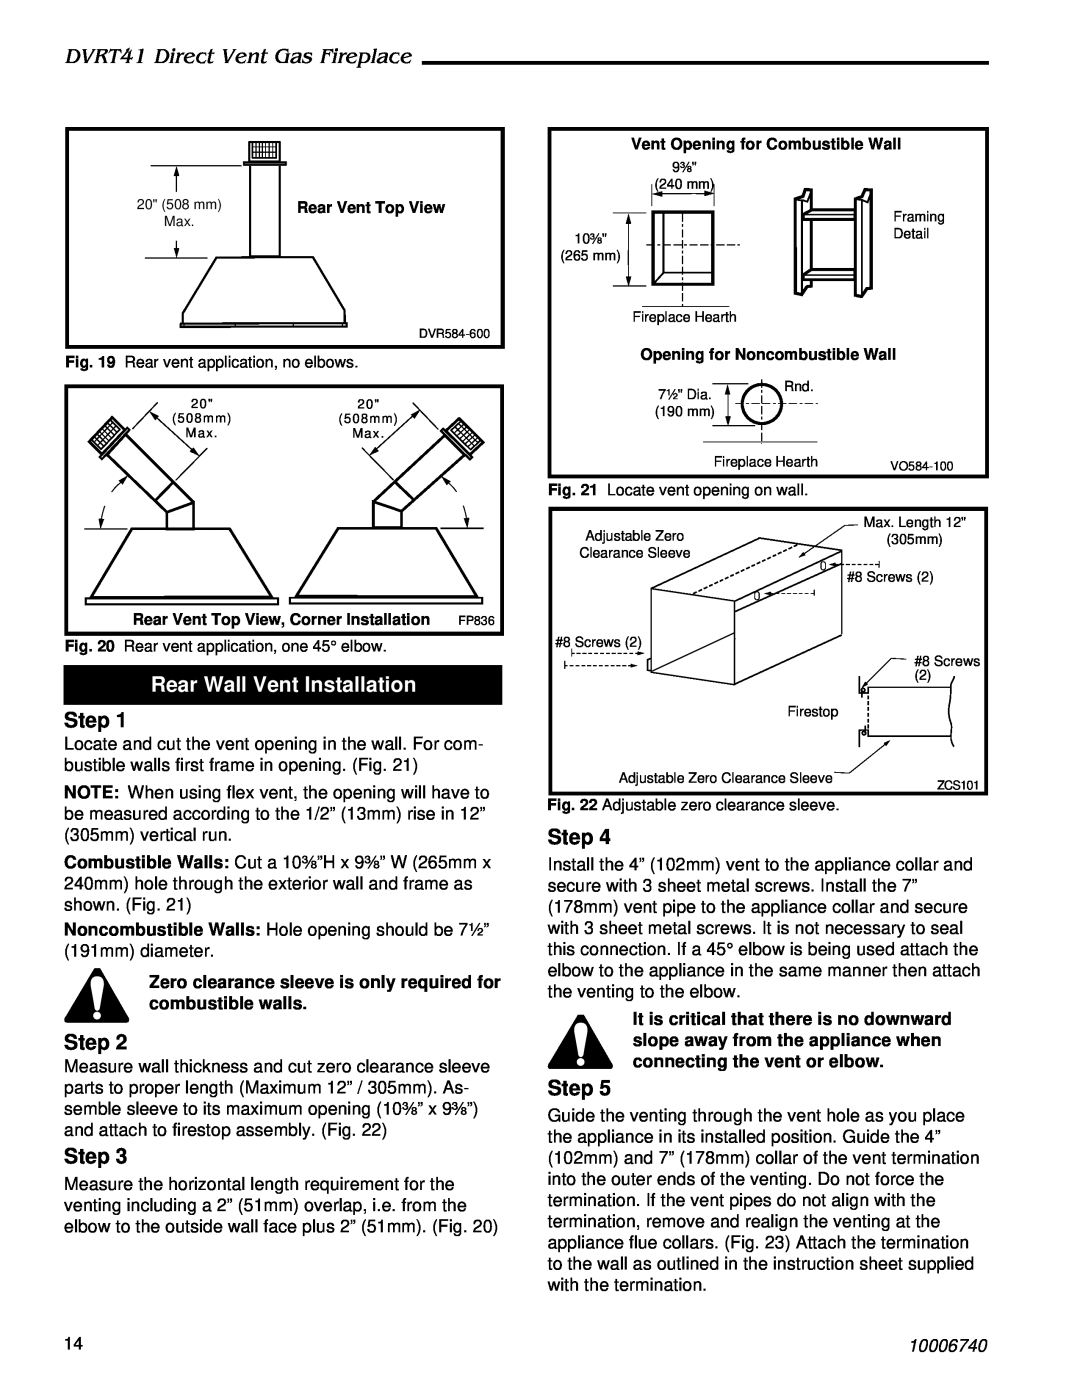 Vermont Casting manual Rear Wall Vent Installation, DVRT41 Direct Vent Gas Fireplace, Step, 10006740 